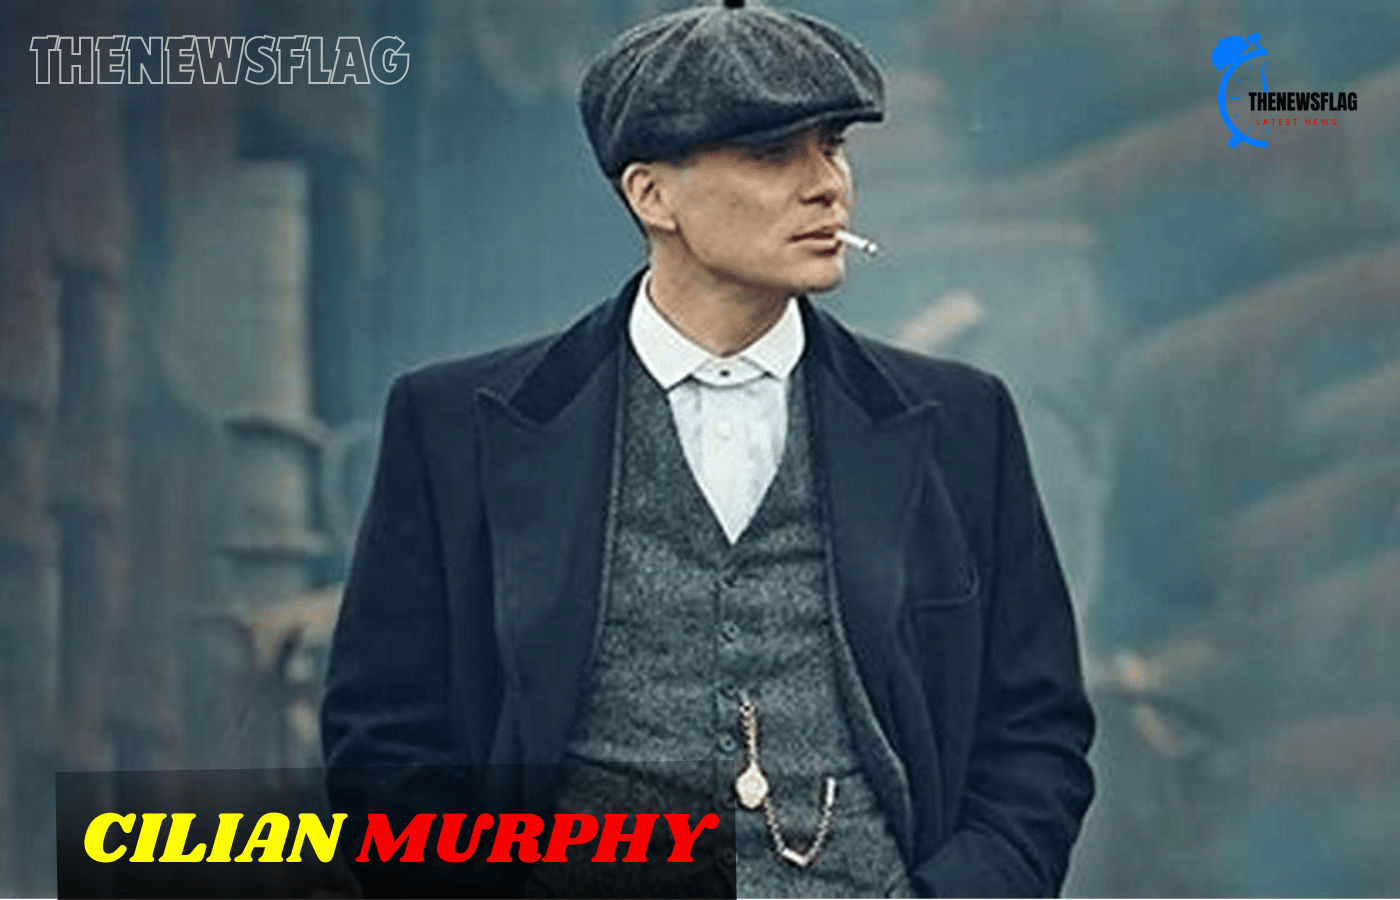 Cilian Murphy will most certainly reprise her role as Tommy Shelby in the Peaky Blinders movie